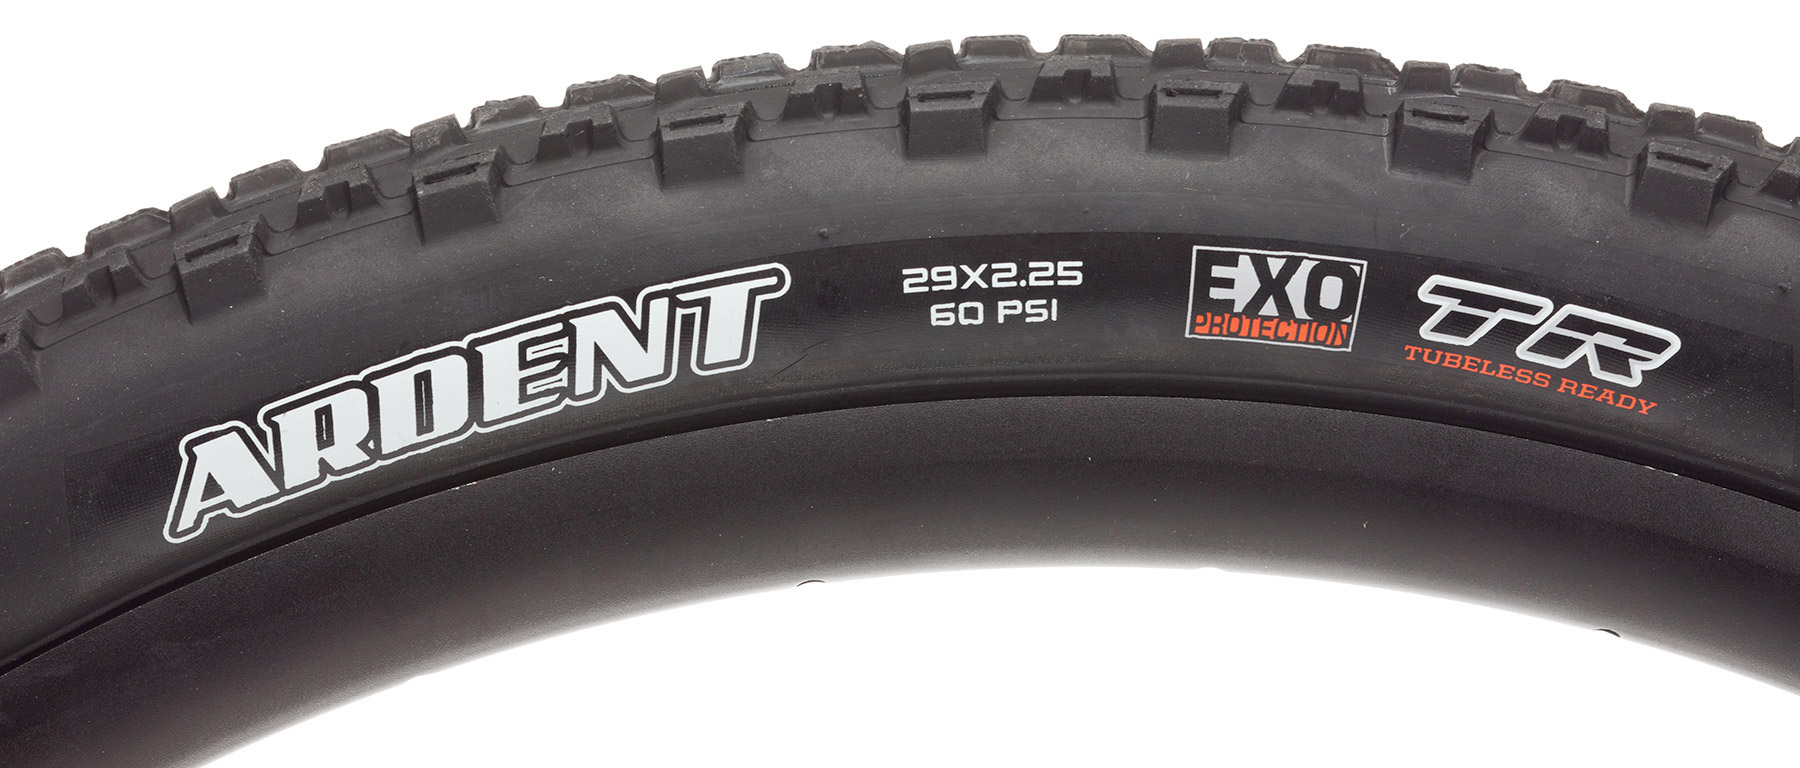 Maxxis Ardent EXO TR Tubeless Tire